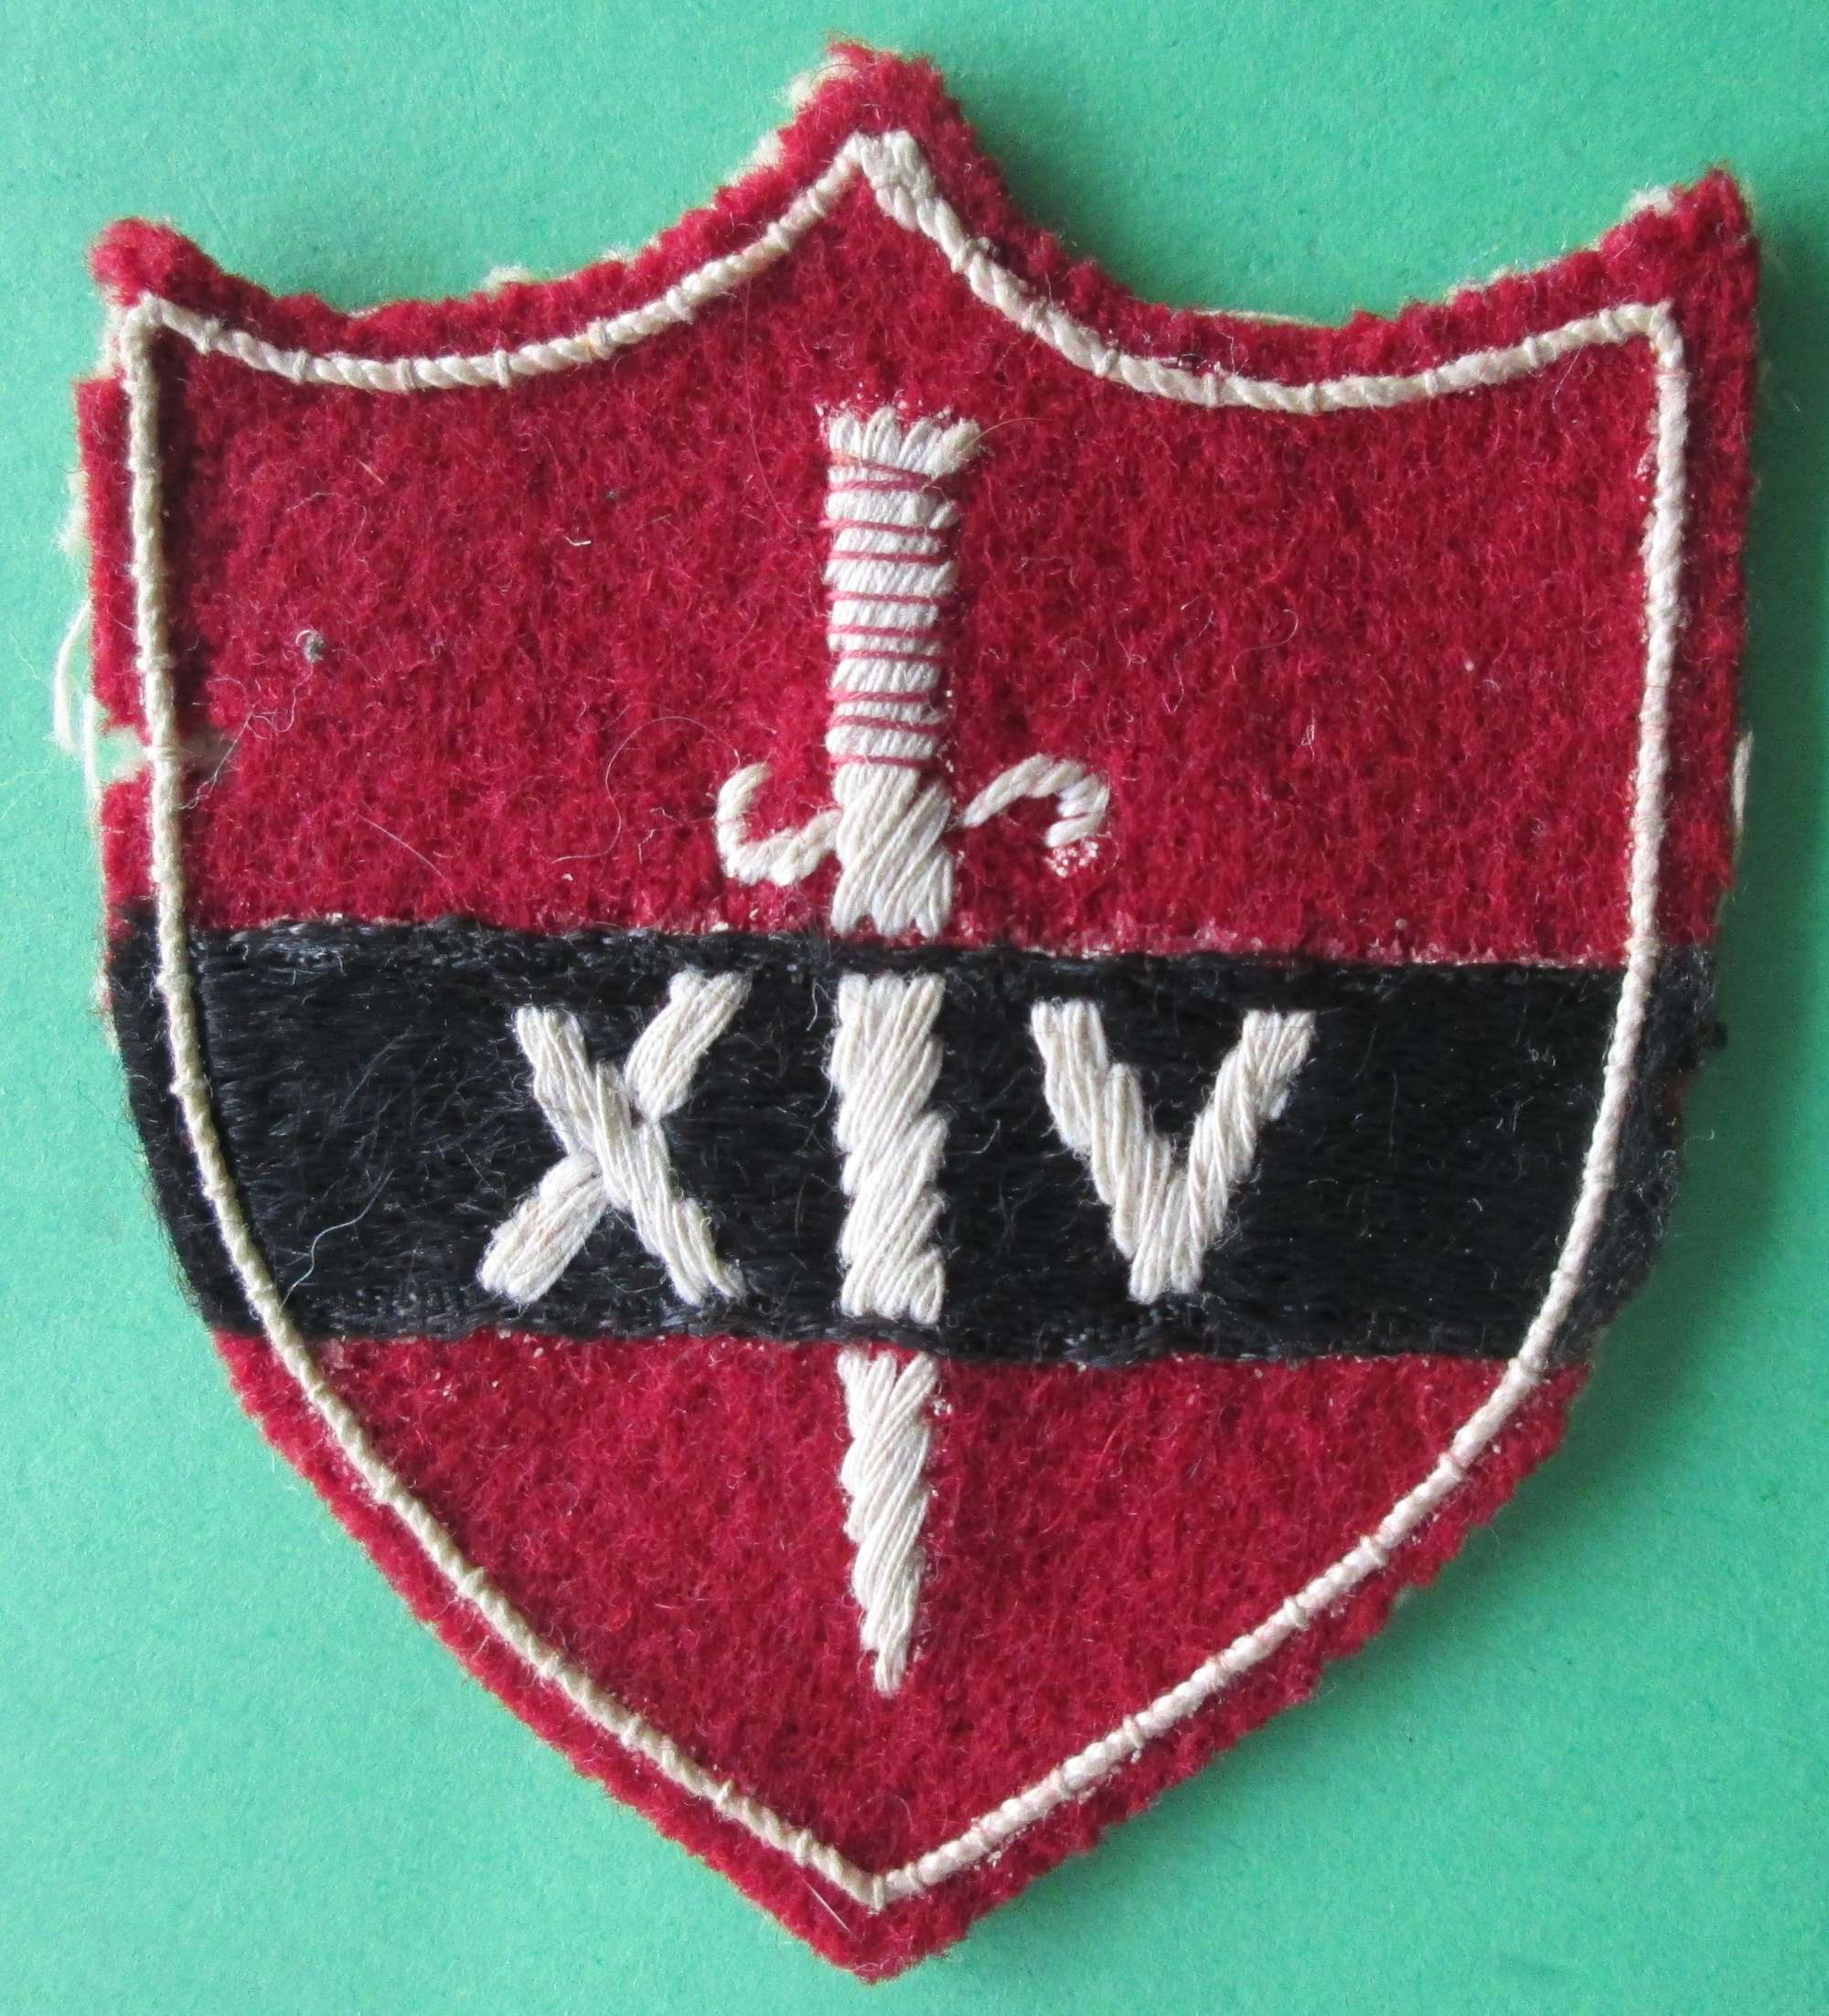 A WWII 14TH ARMY FORMATION PATCH